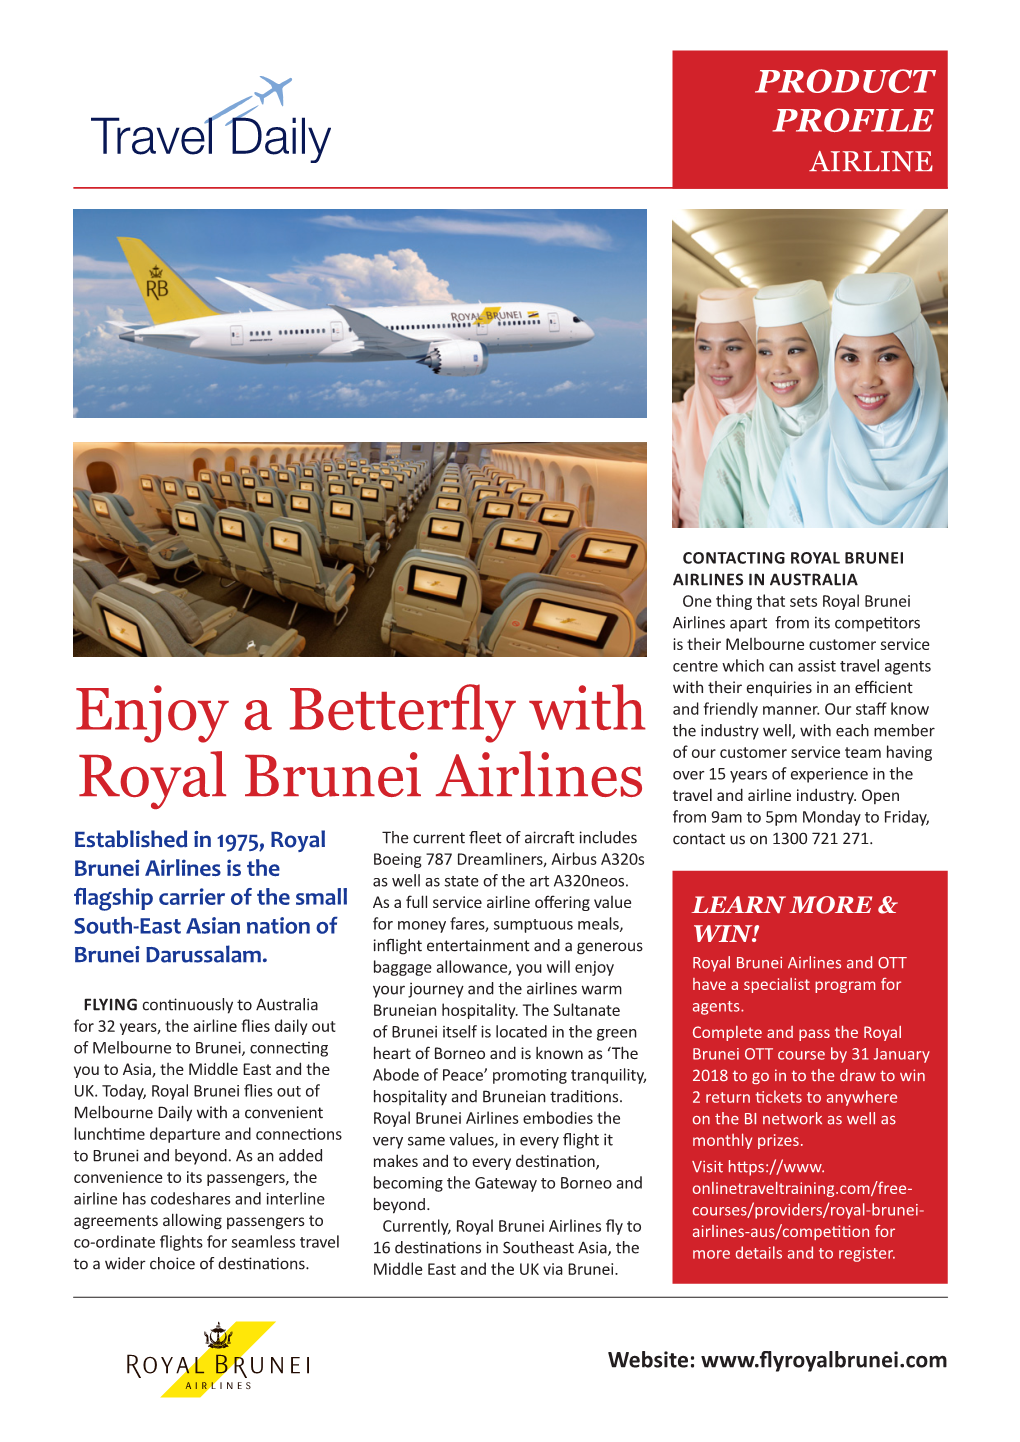 Enjoy a Betterfly with Royal Brunei Airlines